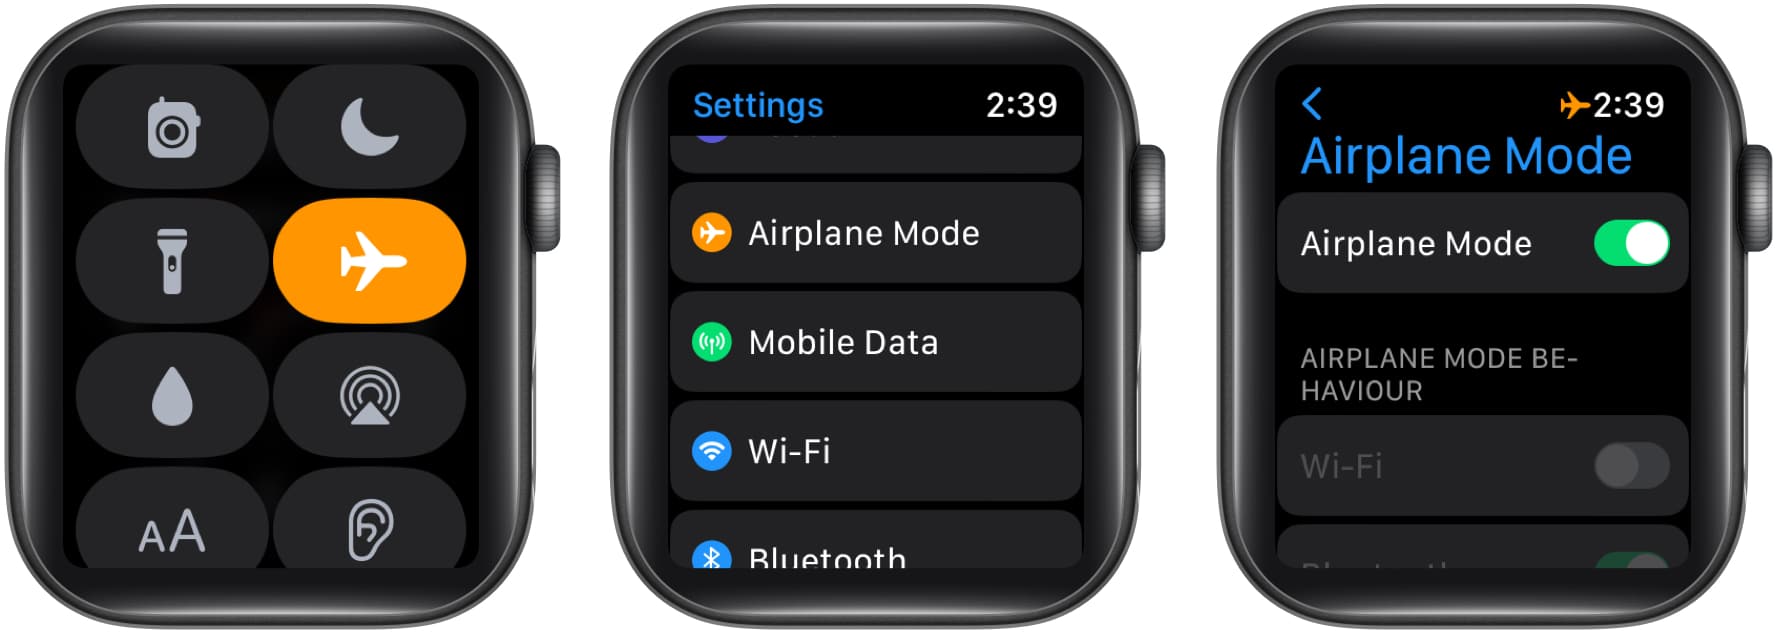 Turn Airplane Mode on & off on Apple Watch